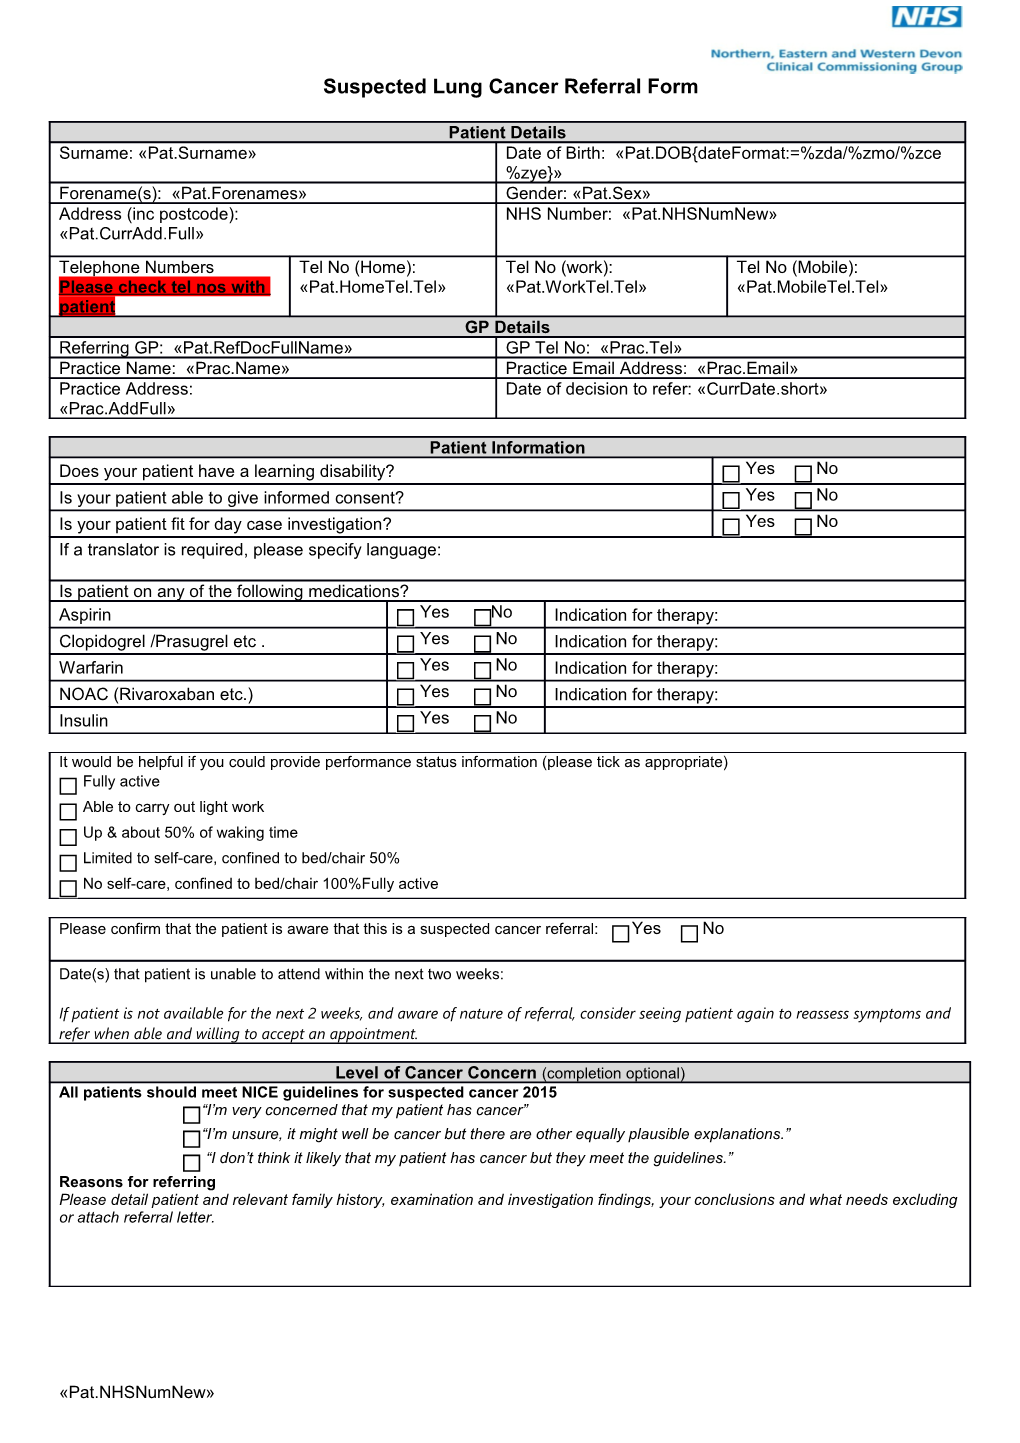 Suspected Lung Cancer Referral Form